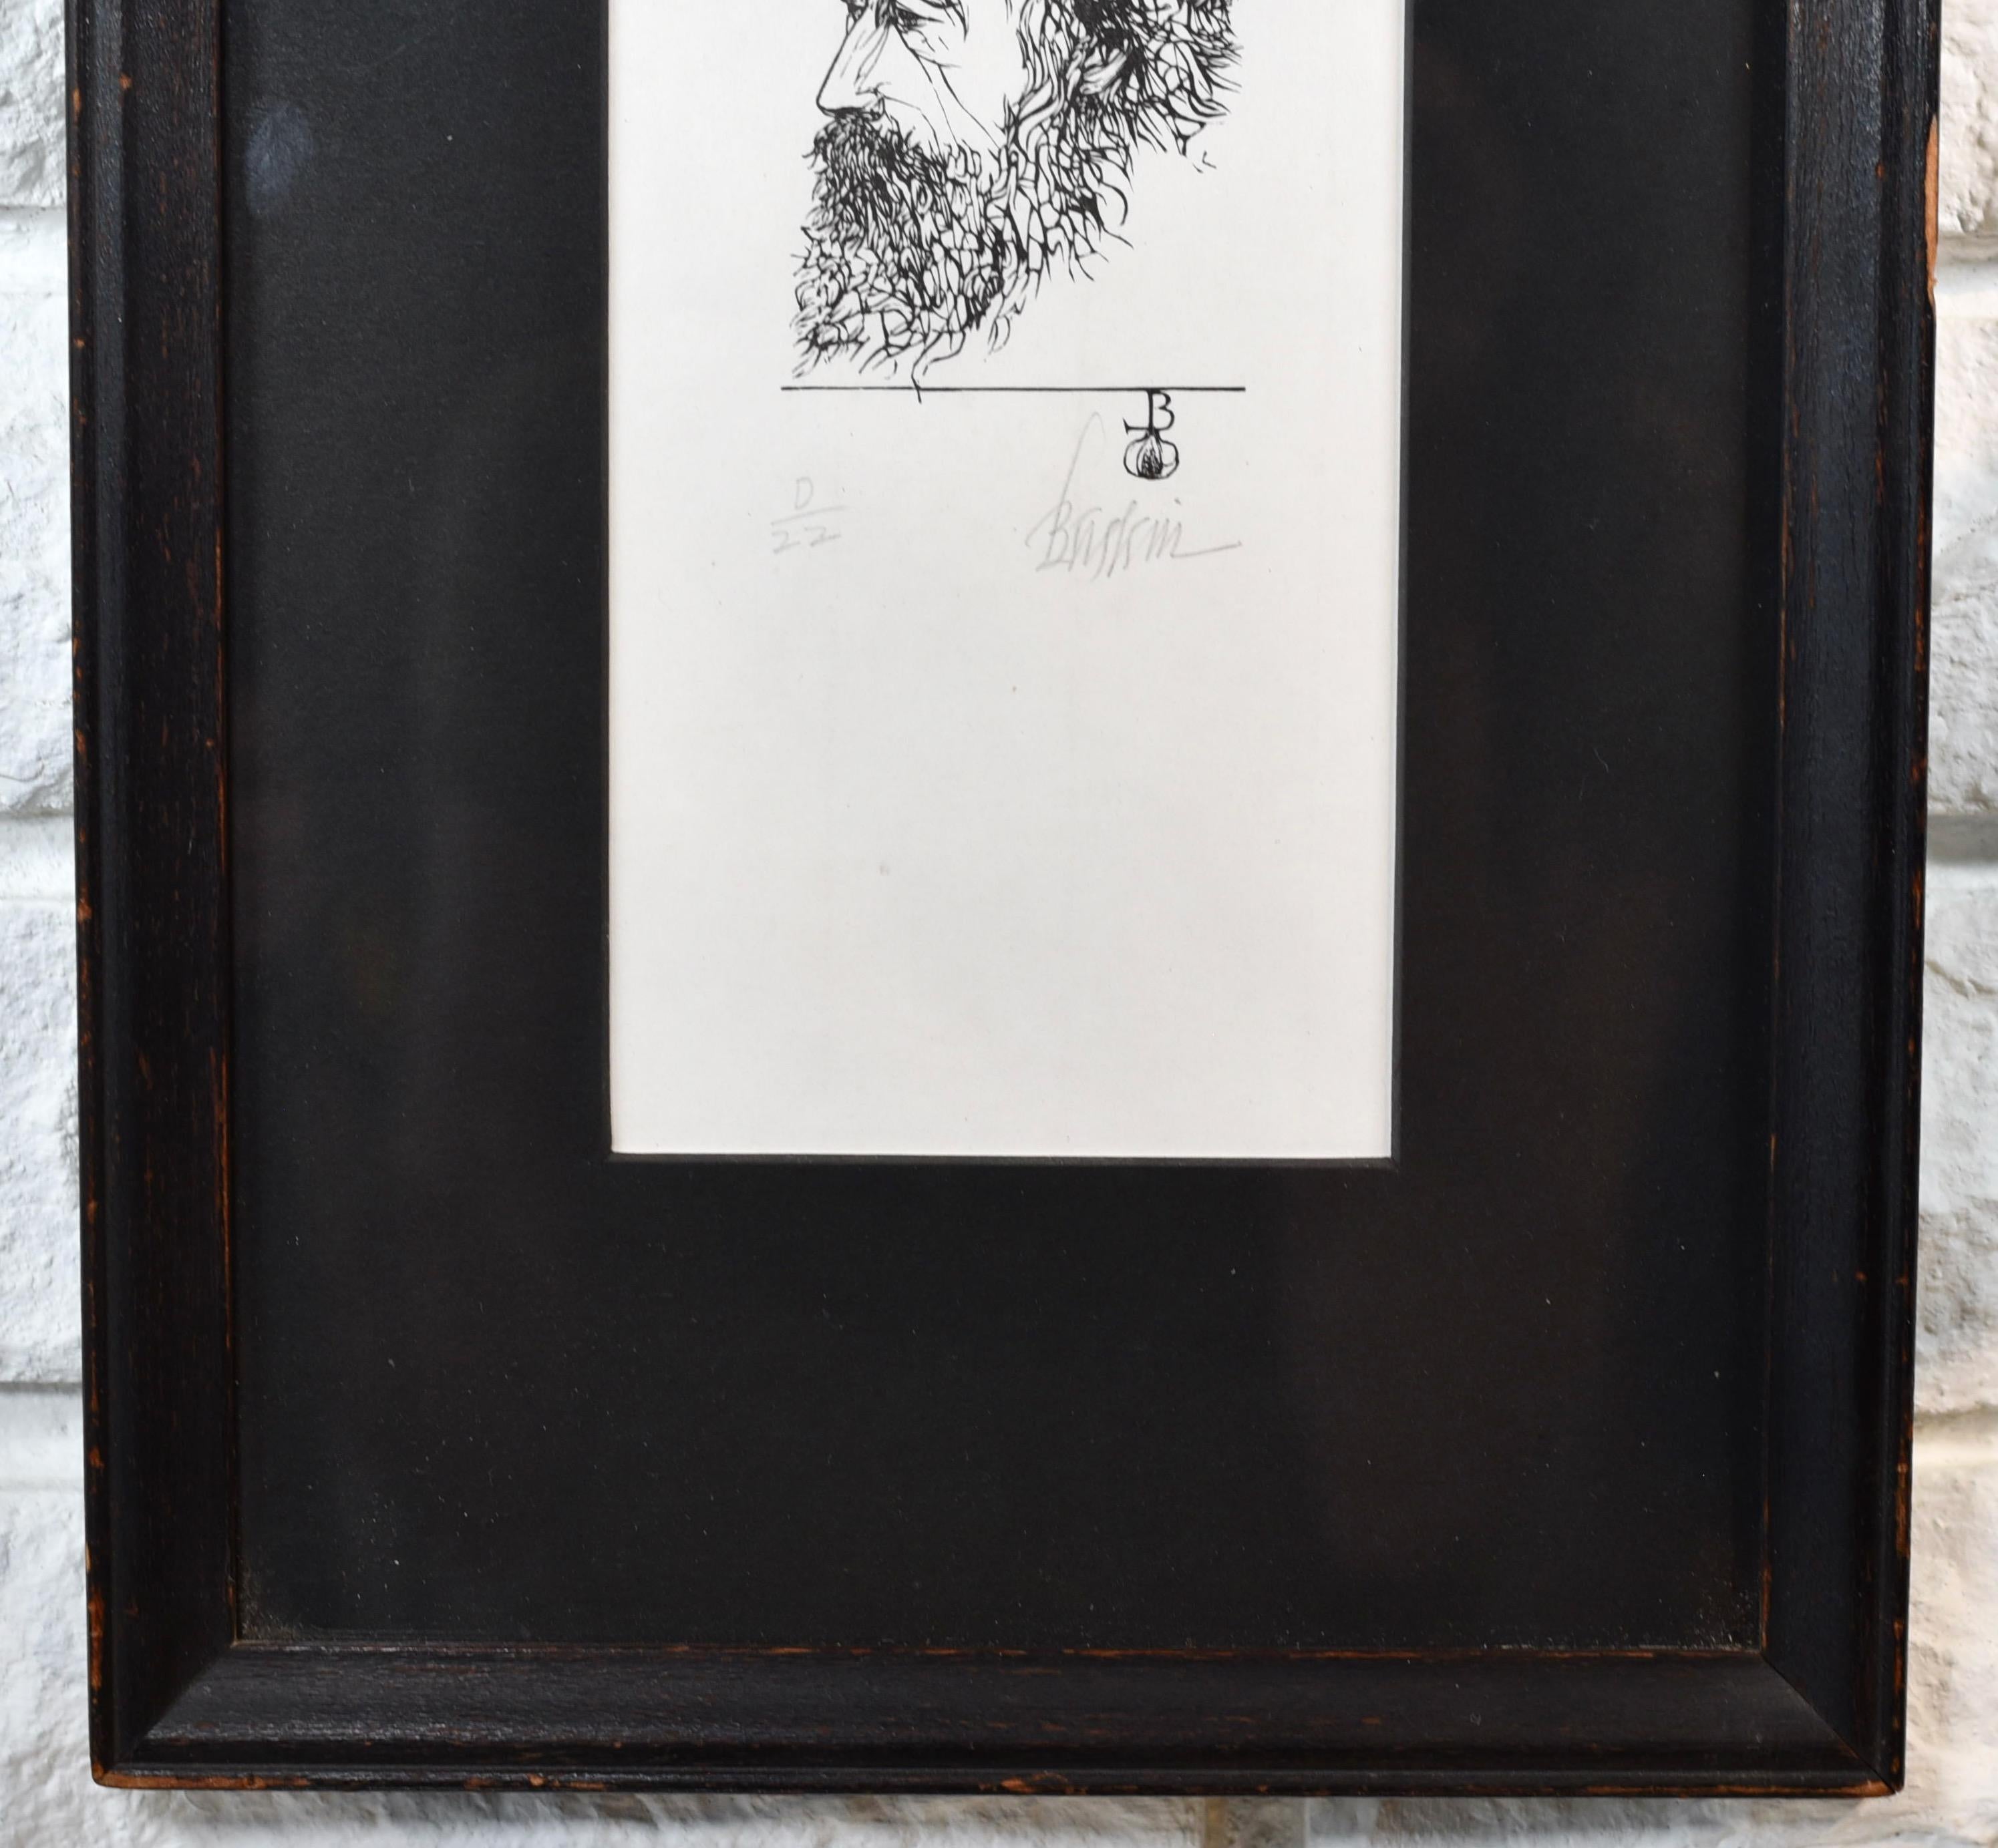 Woodcut engraving by well known printer and artist Leonard Baskin depicting William Morris.